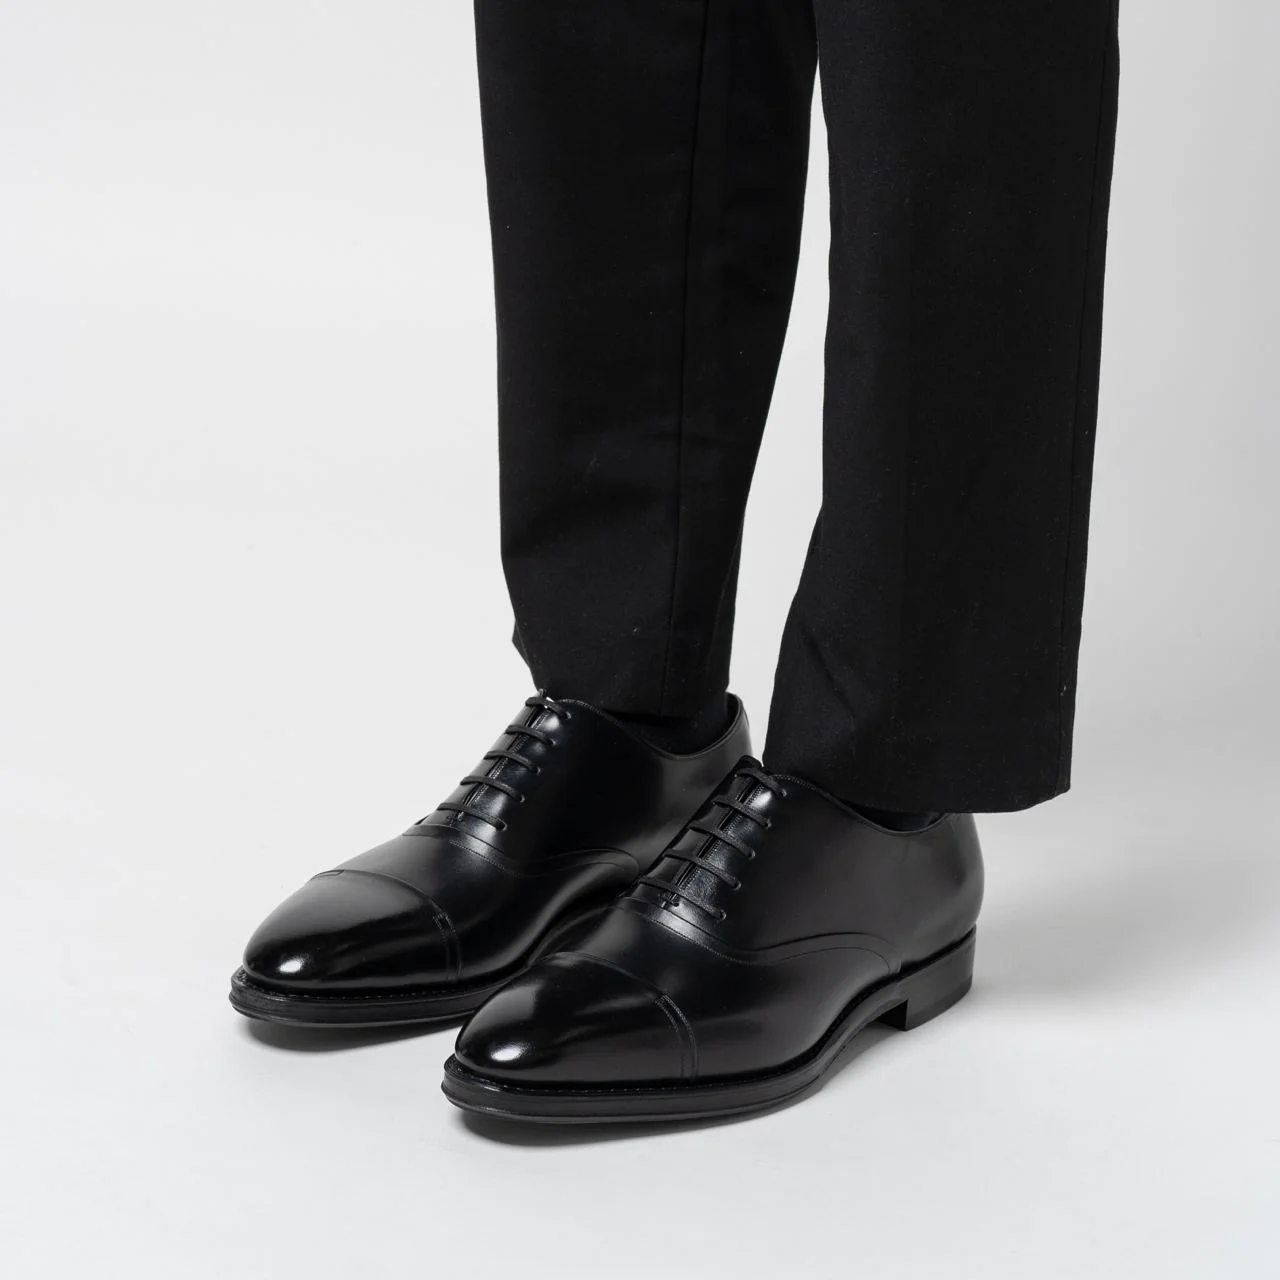 Bally Scribe Calf Leather Oxford Shoes Black